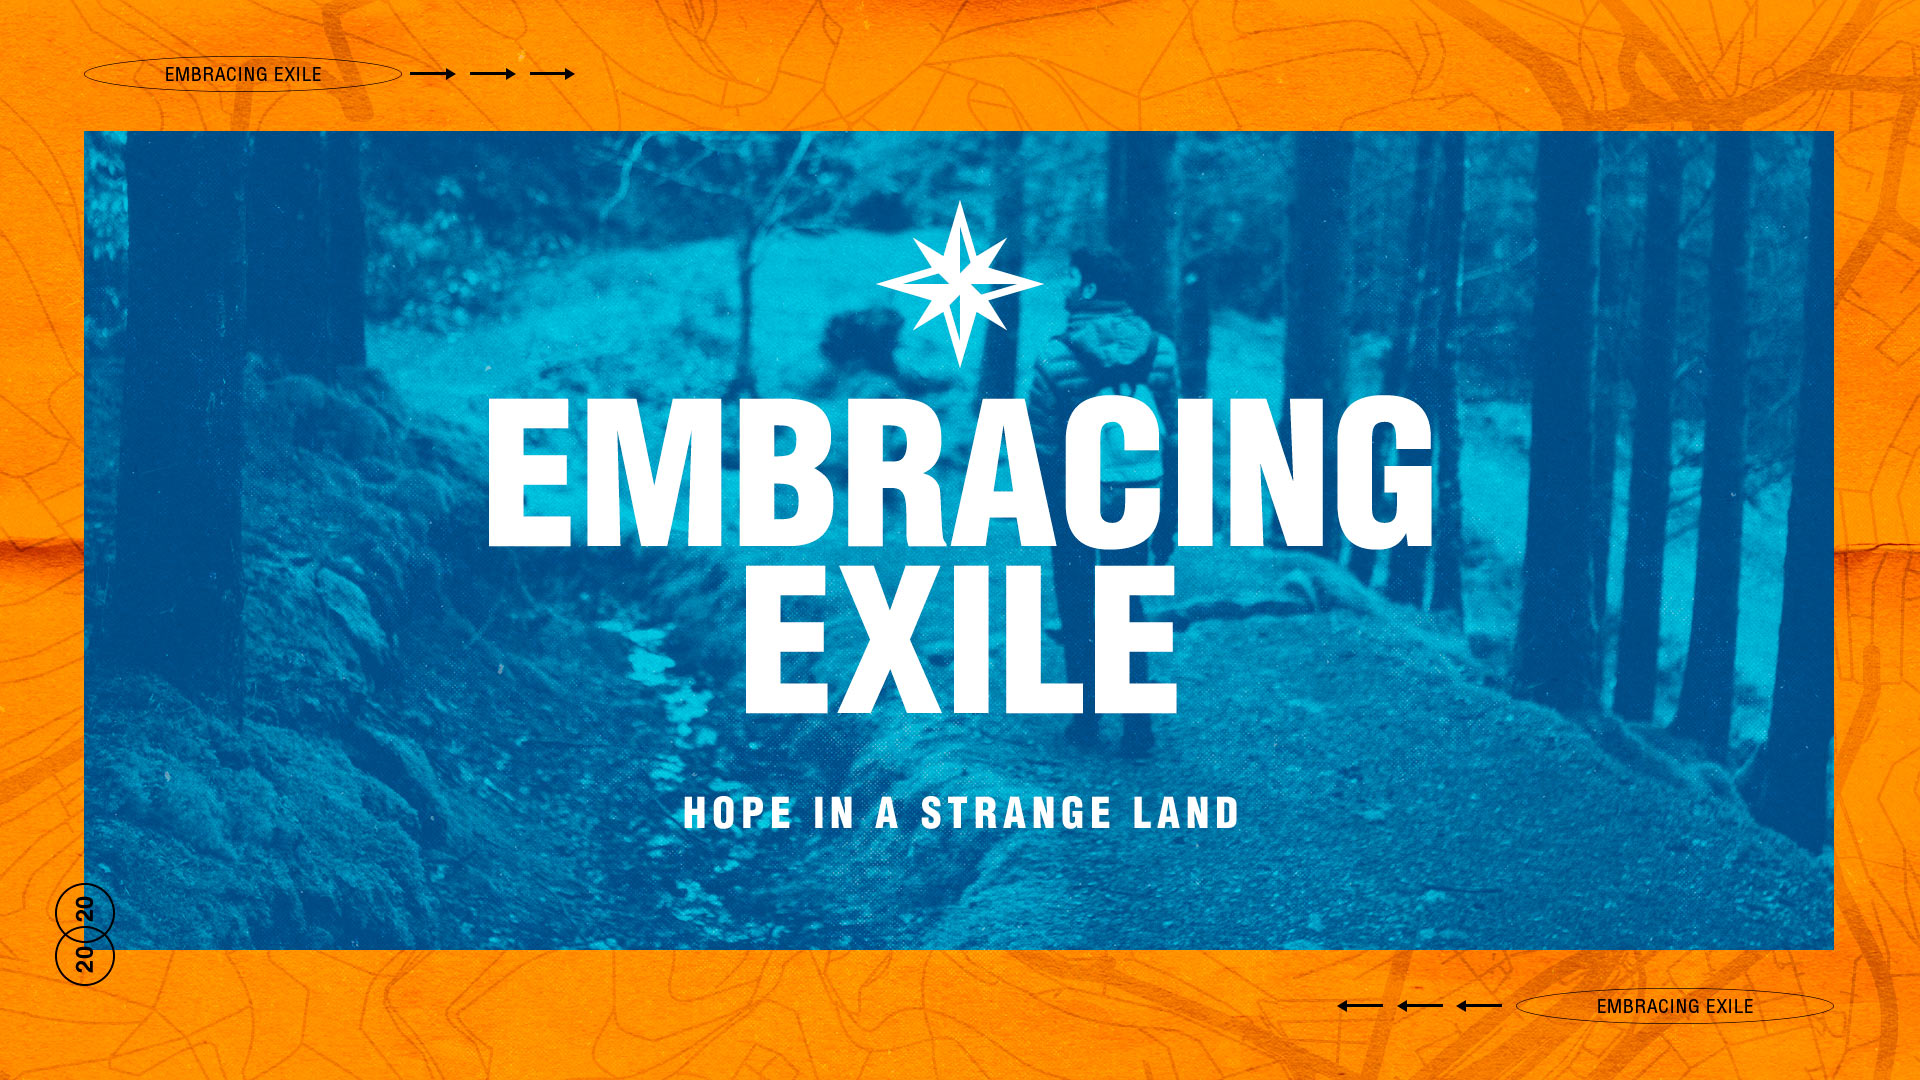  Embracing Exile